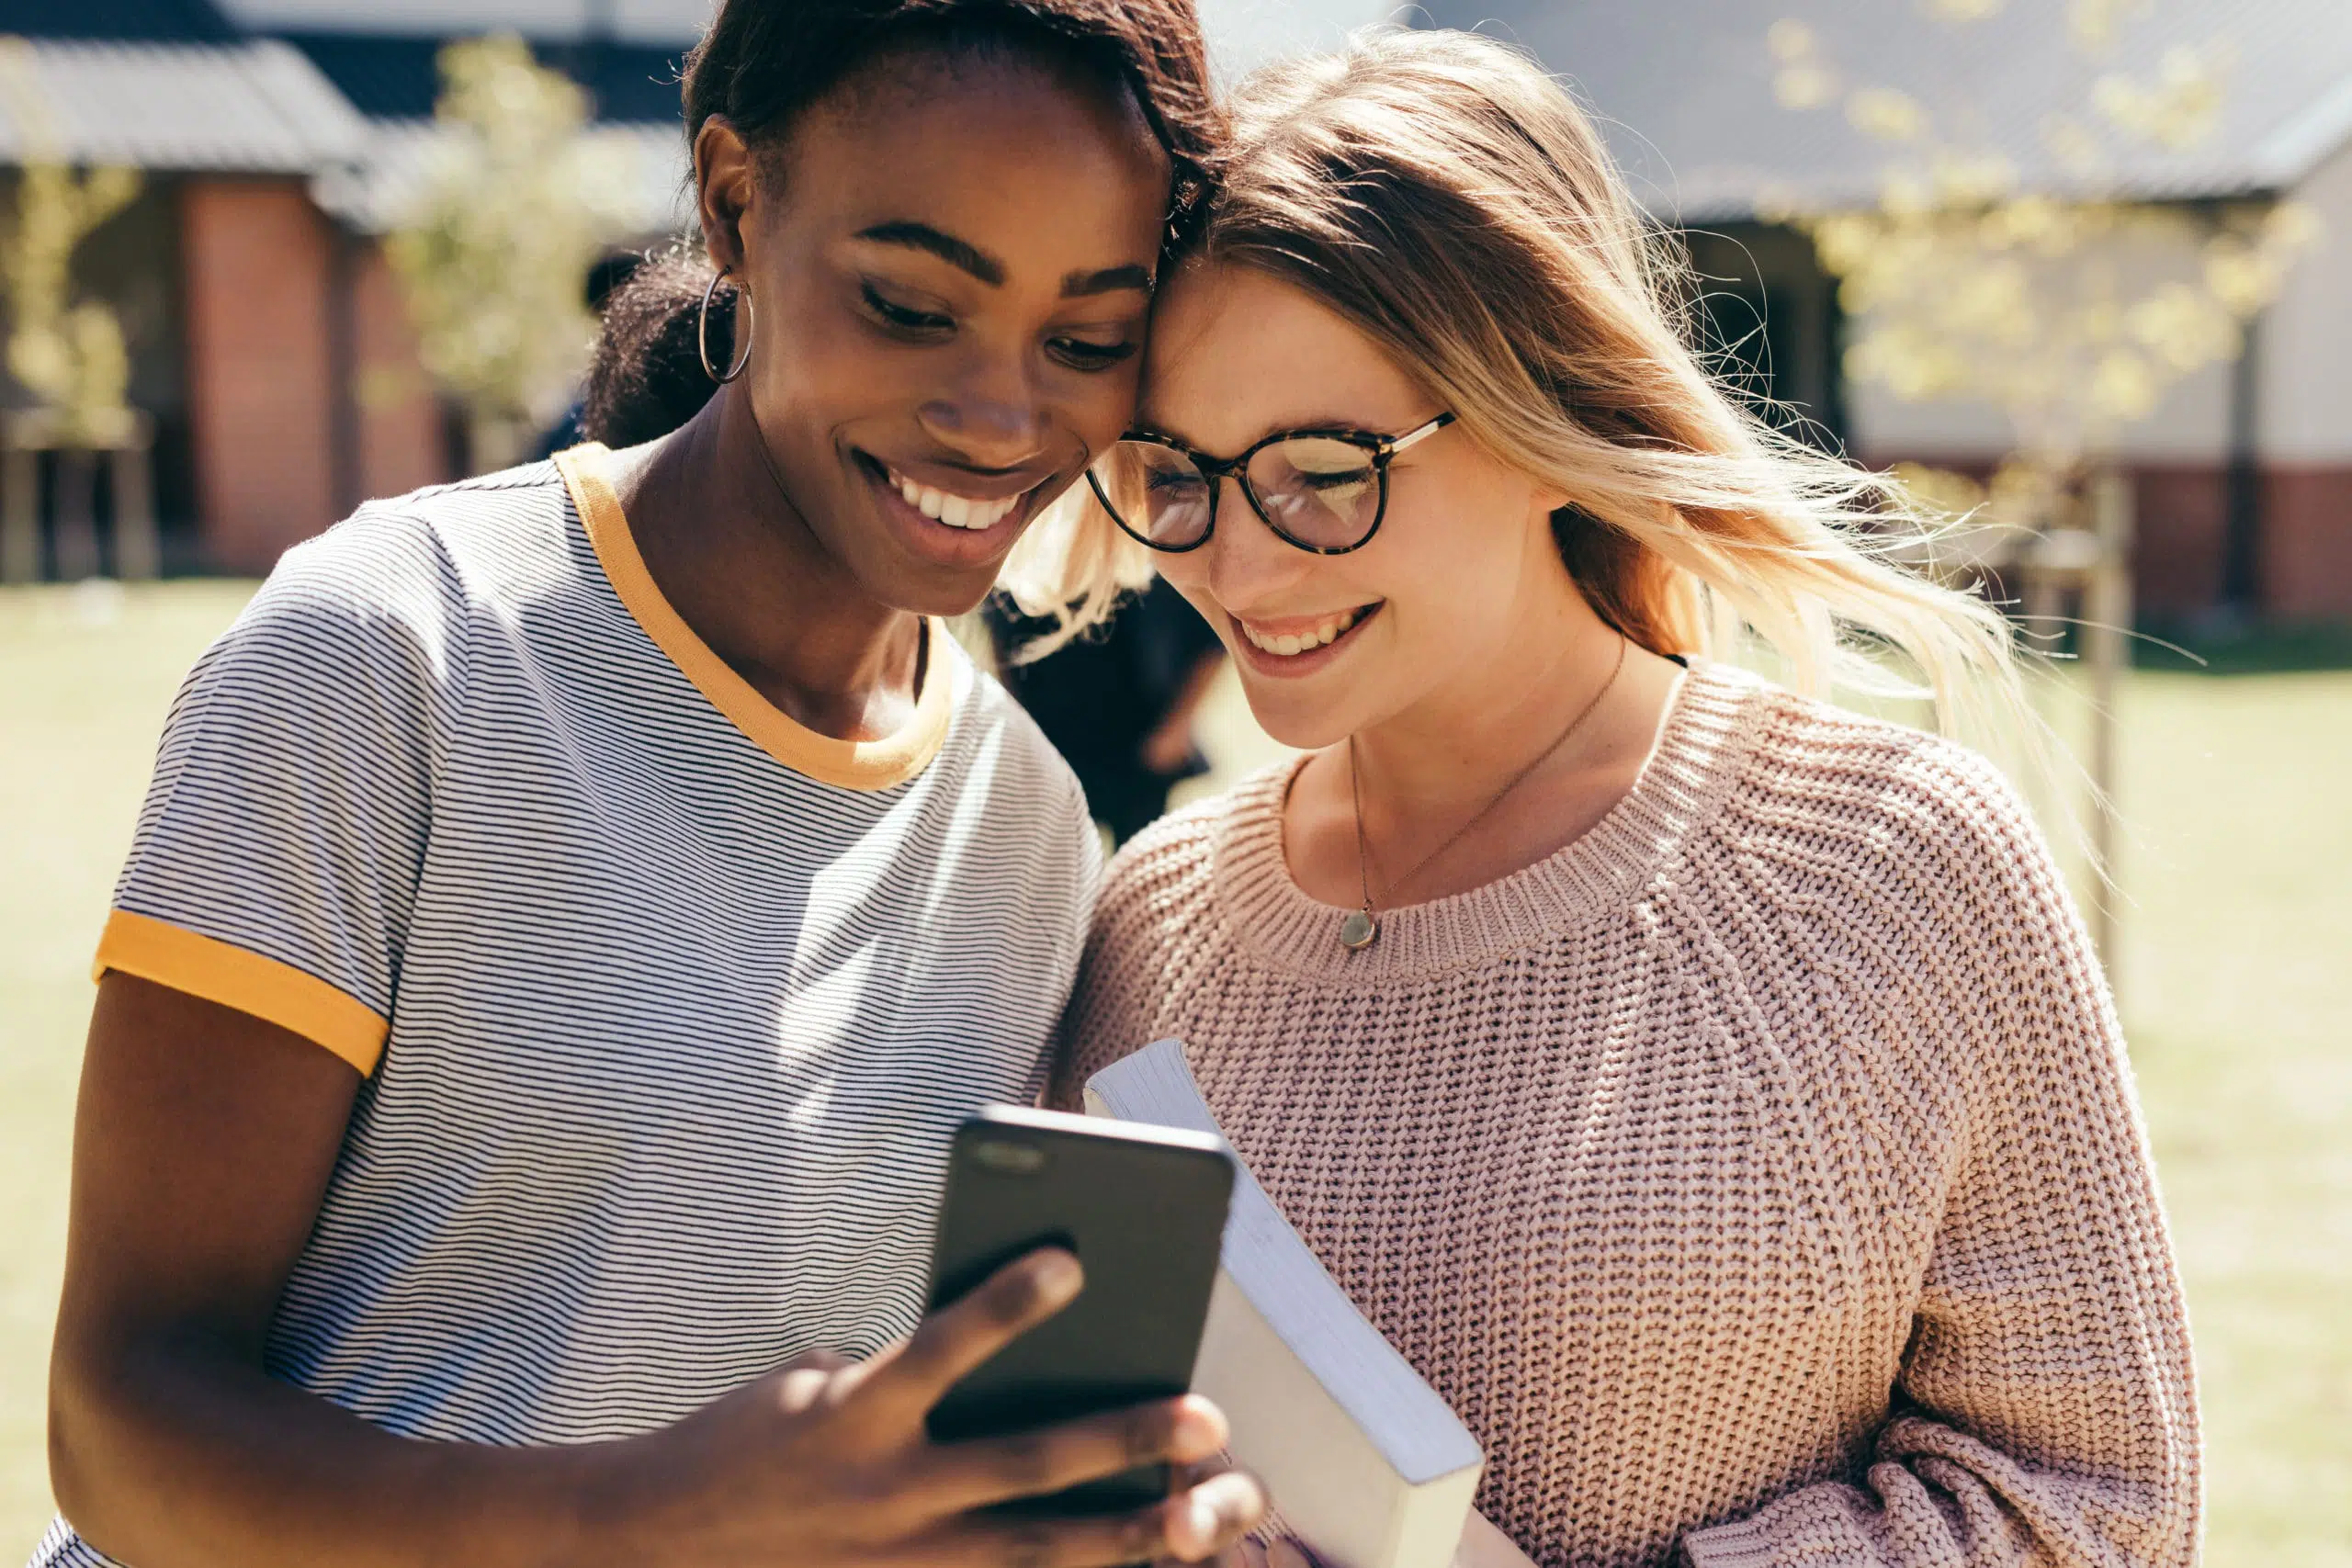 two young women looking at a phone screen and smiling